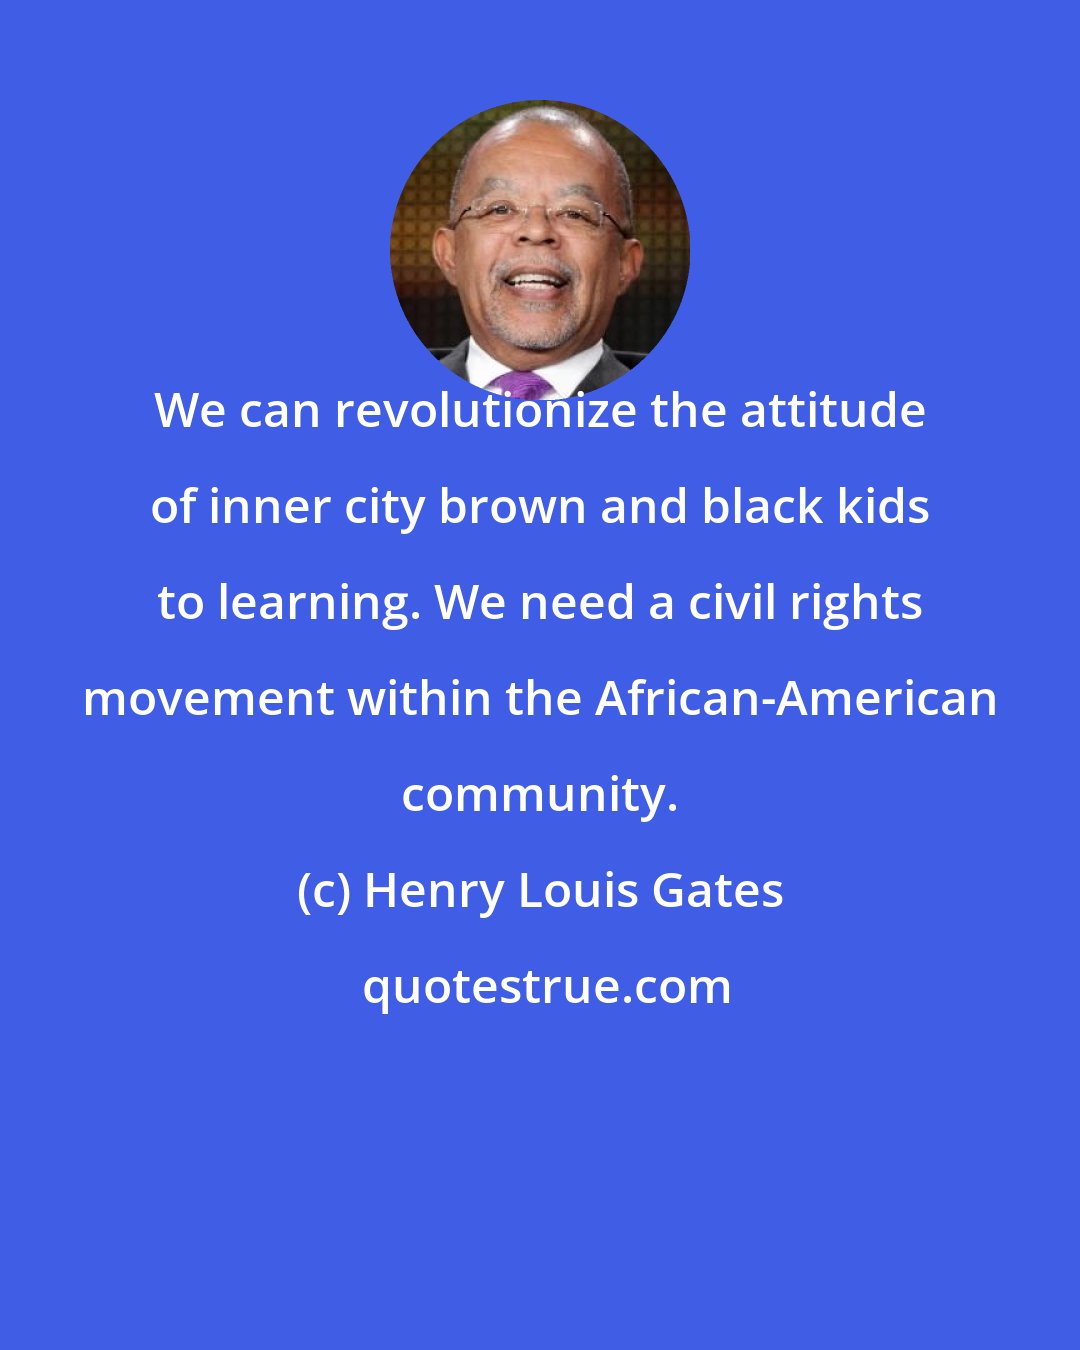 Henry Louis Gates: We can revolutionize the attitude of inner city brown and black kids to learning. We need a civil rights movement within the African-American community.